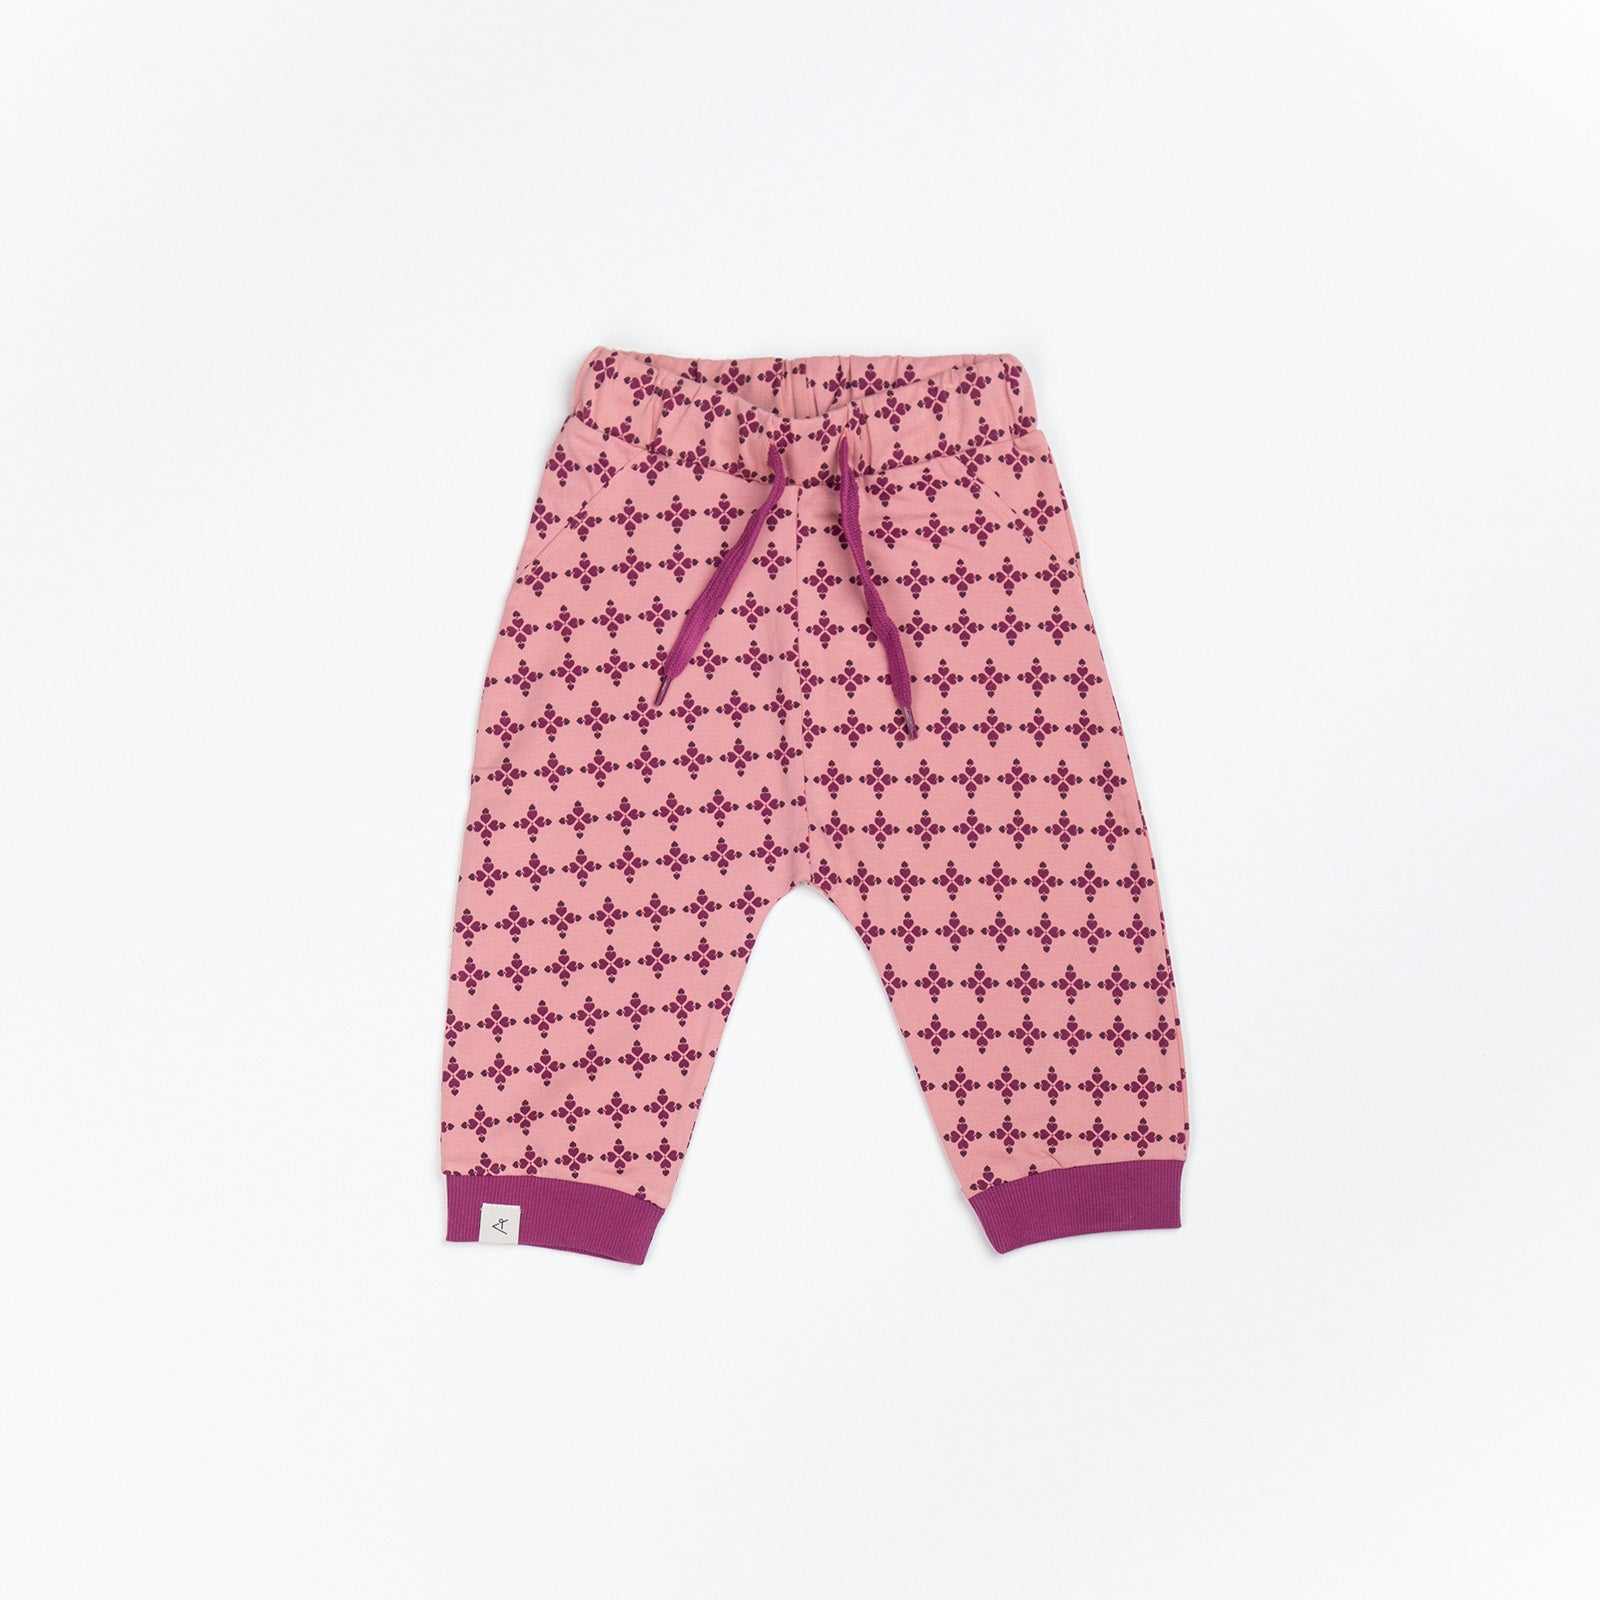 PRICE DROP * Alba - Lucca Pants - Branded Apricot Heart